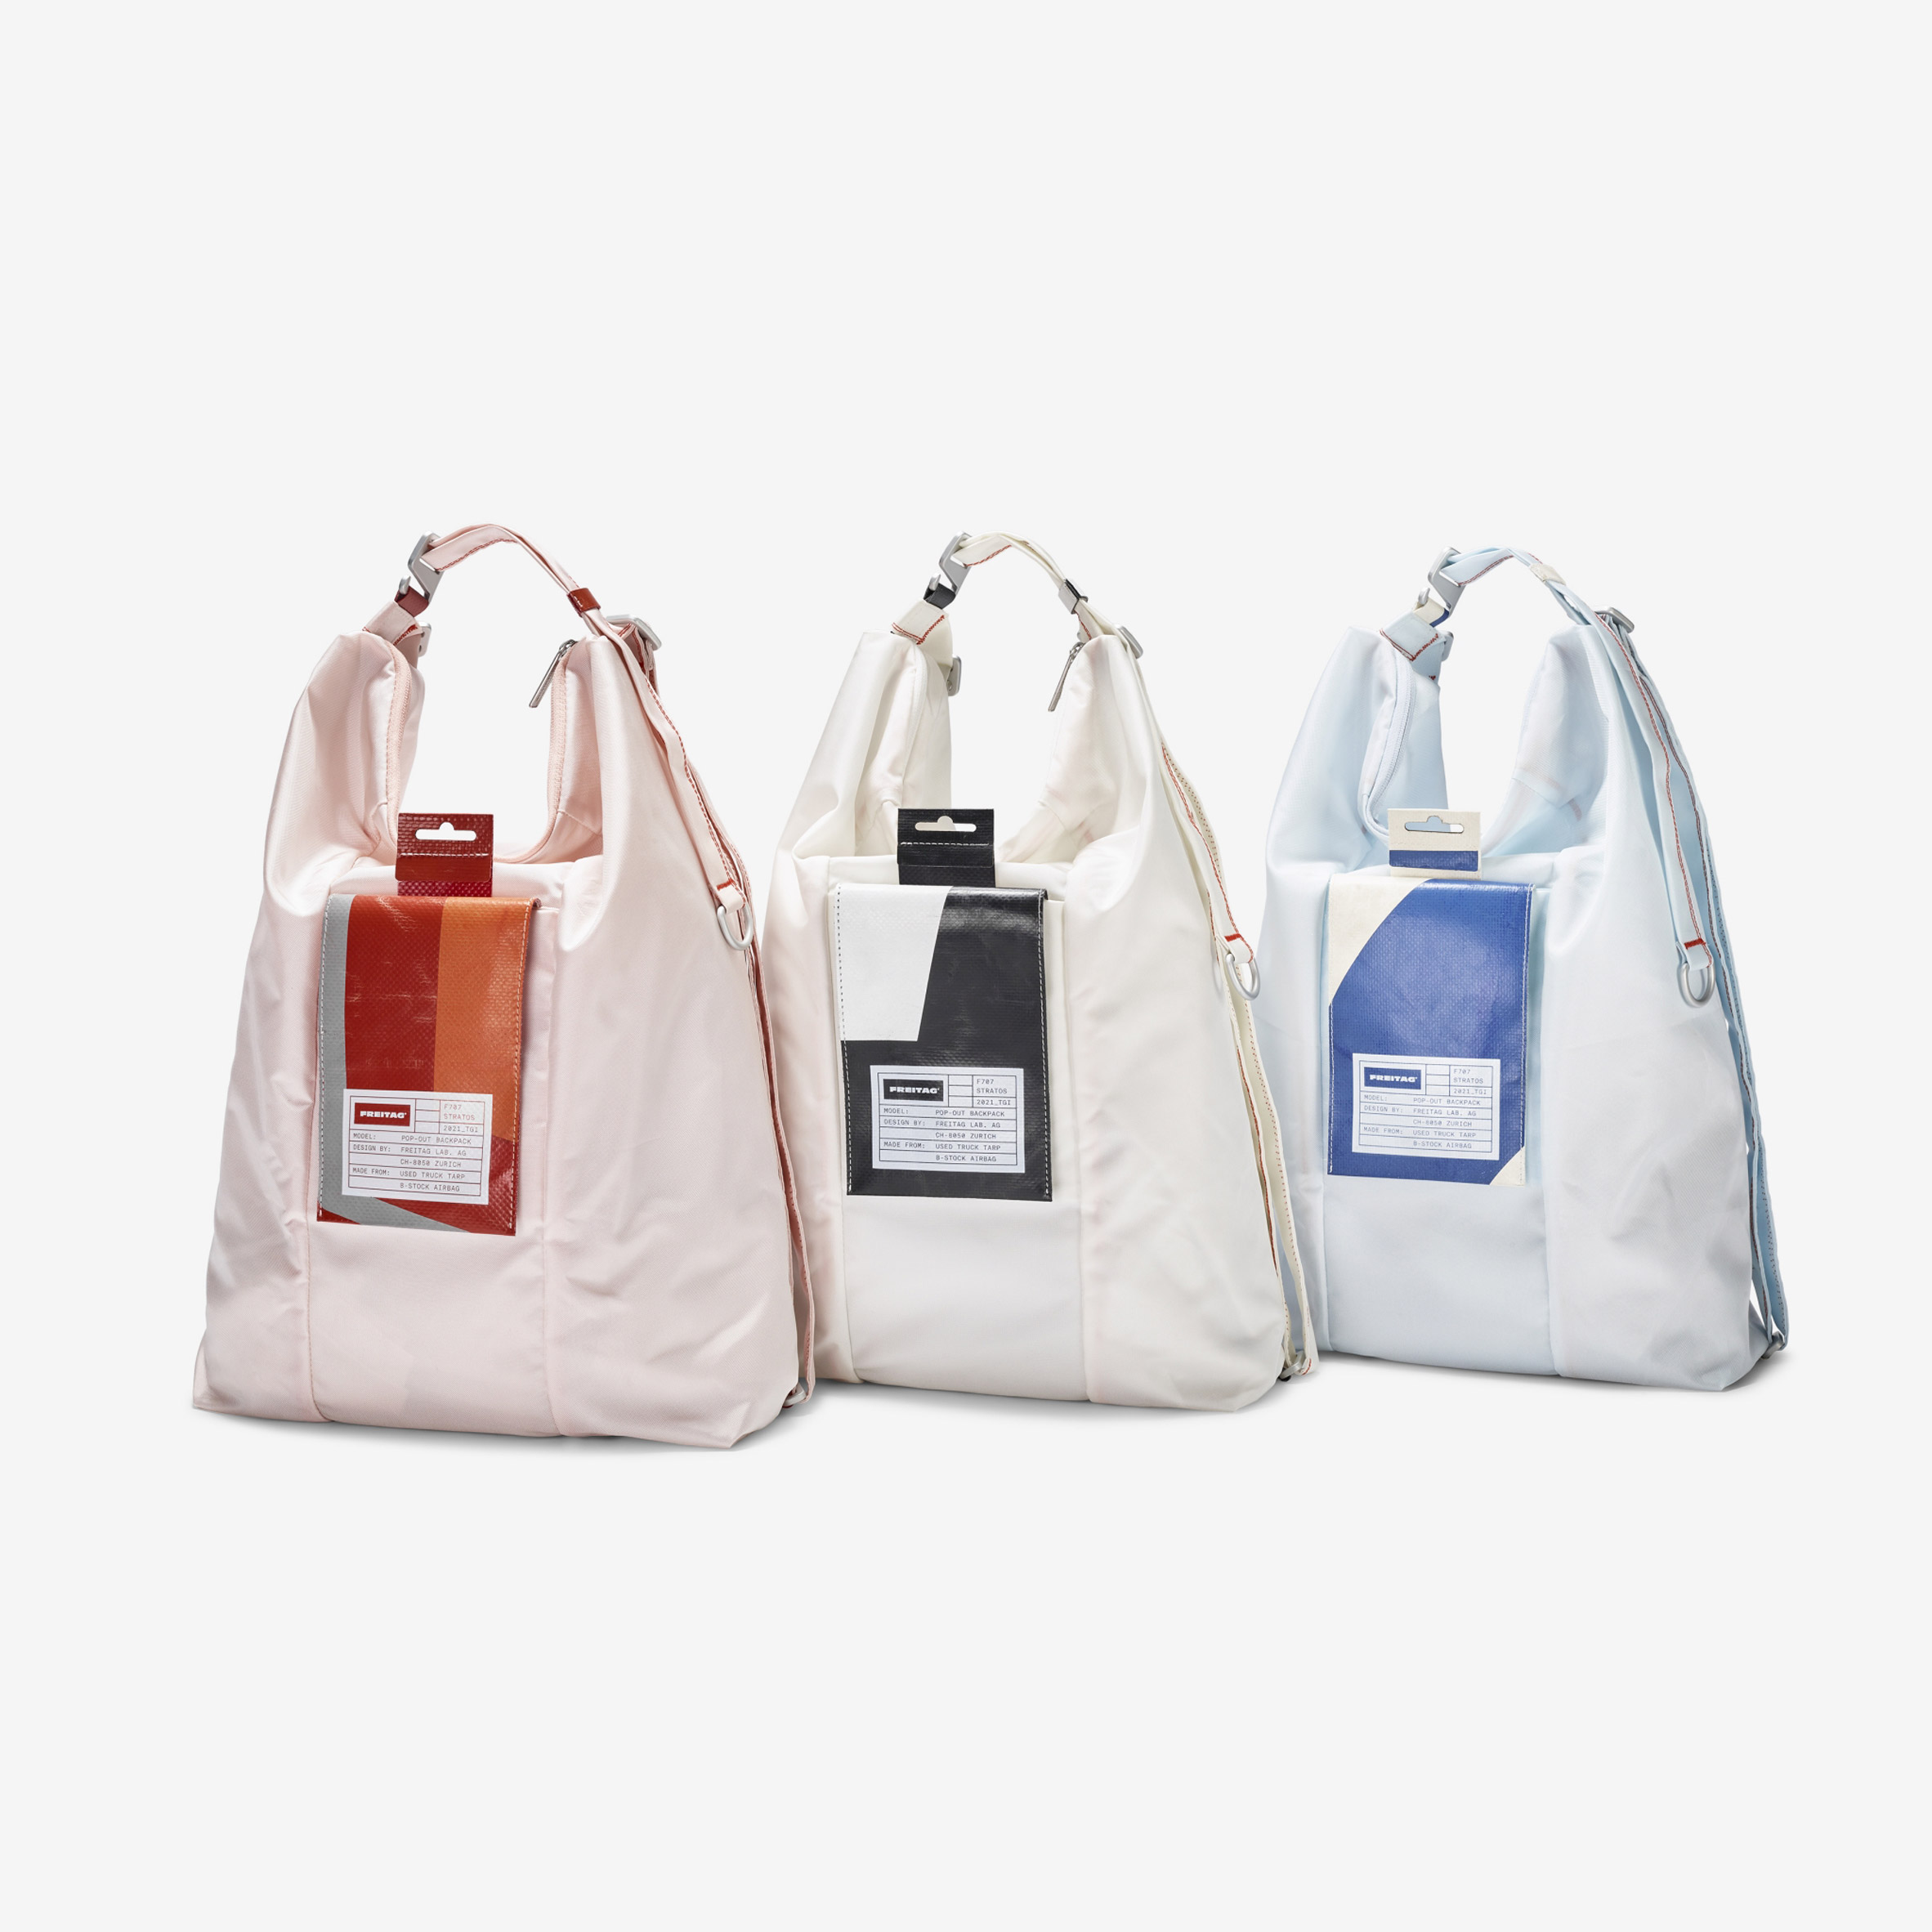 Freitag produces multipurpose bag using fabric from discarded airbags